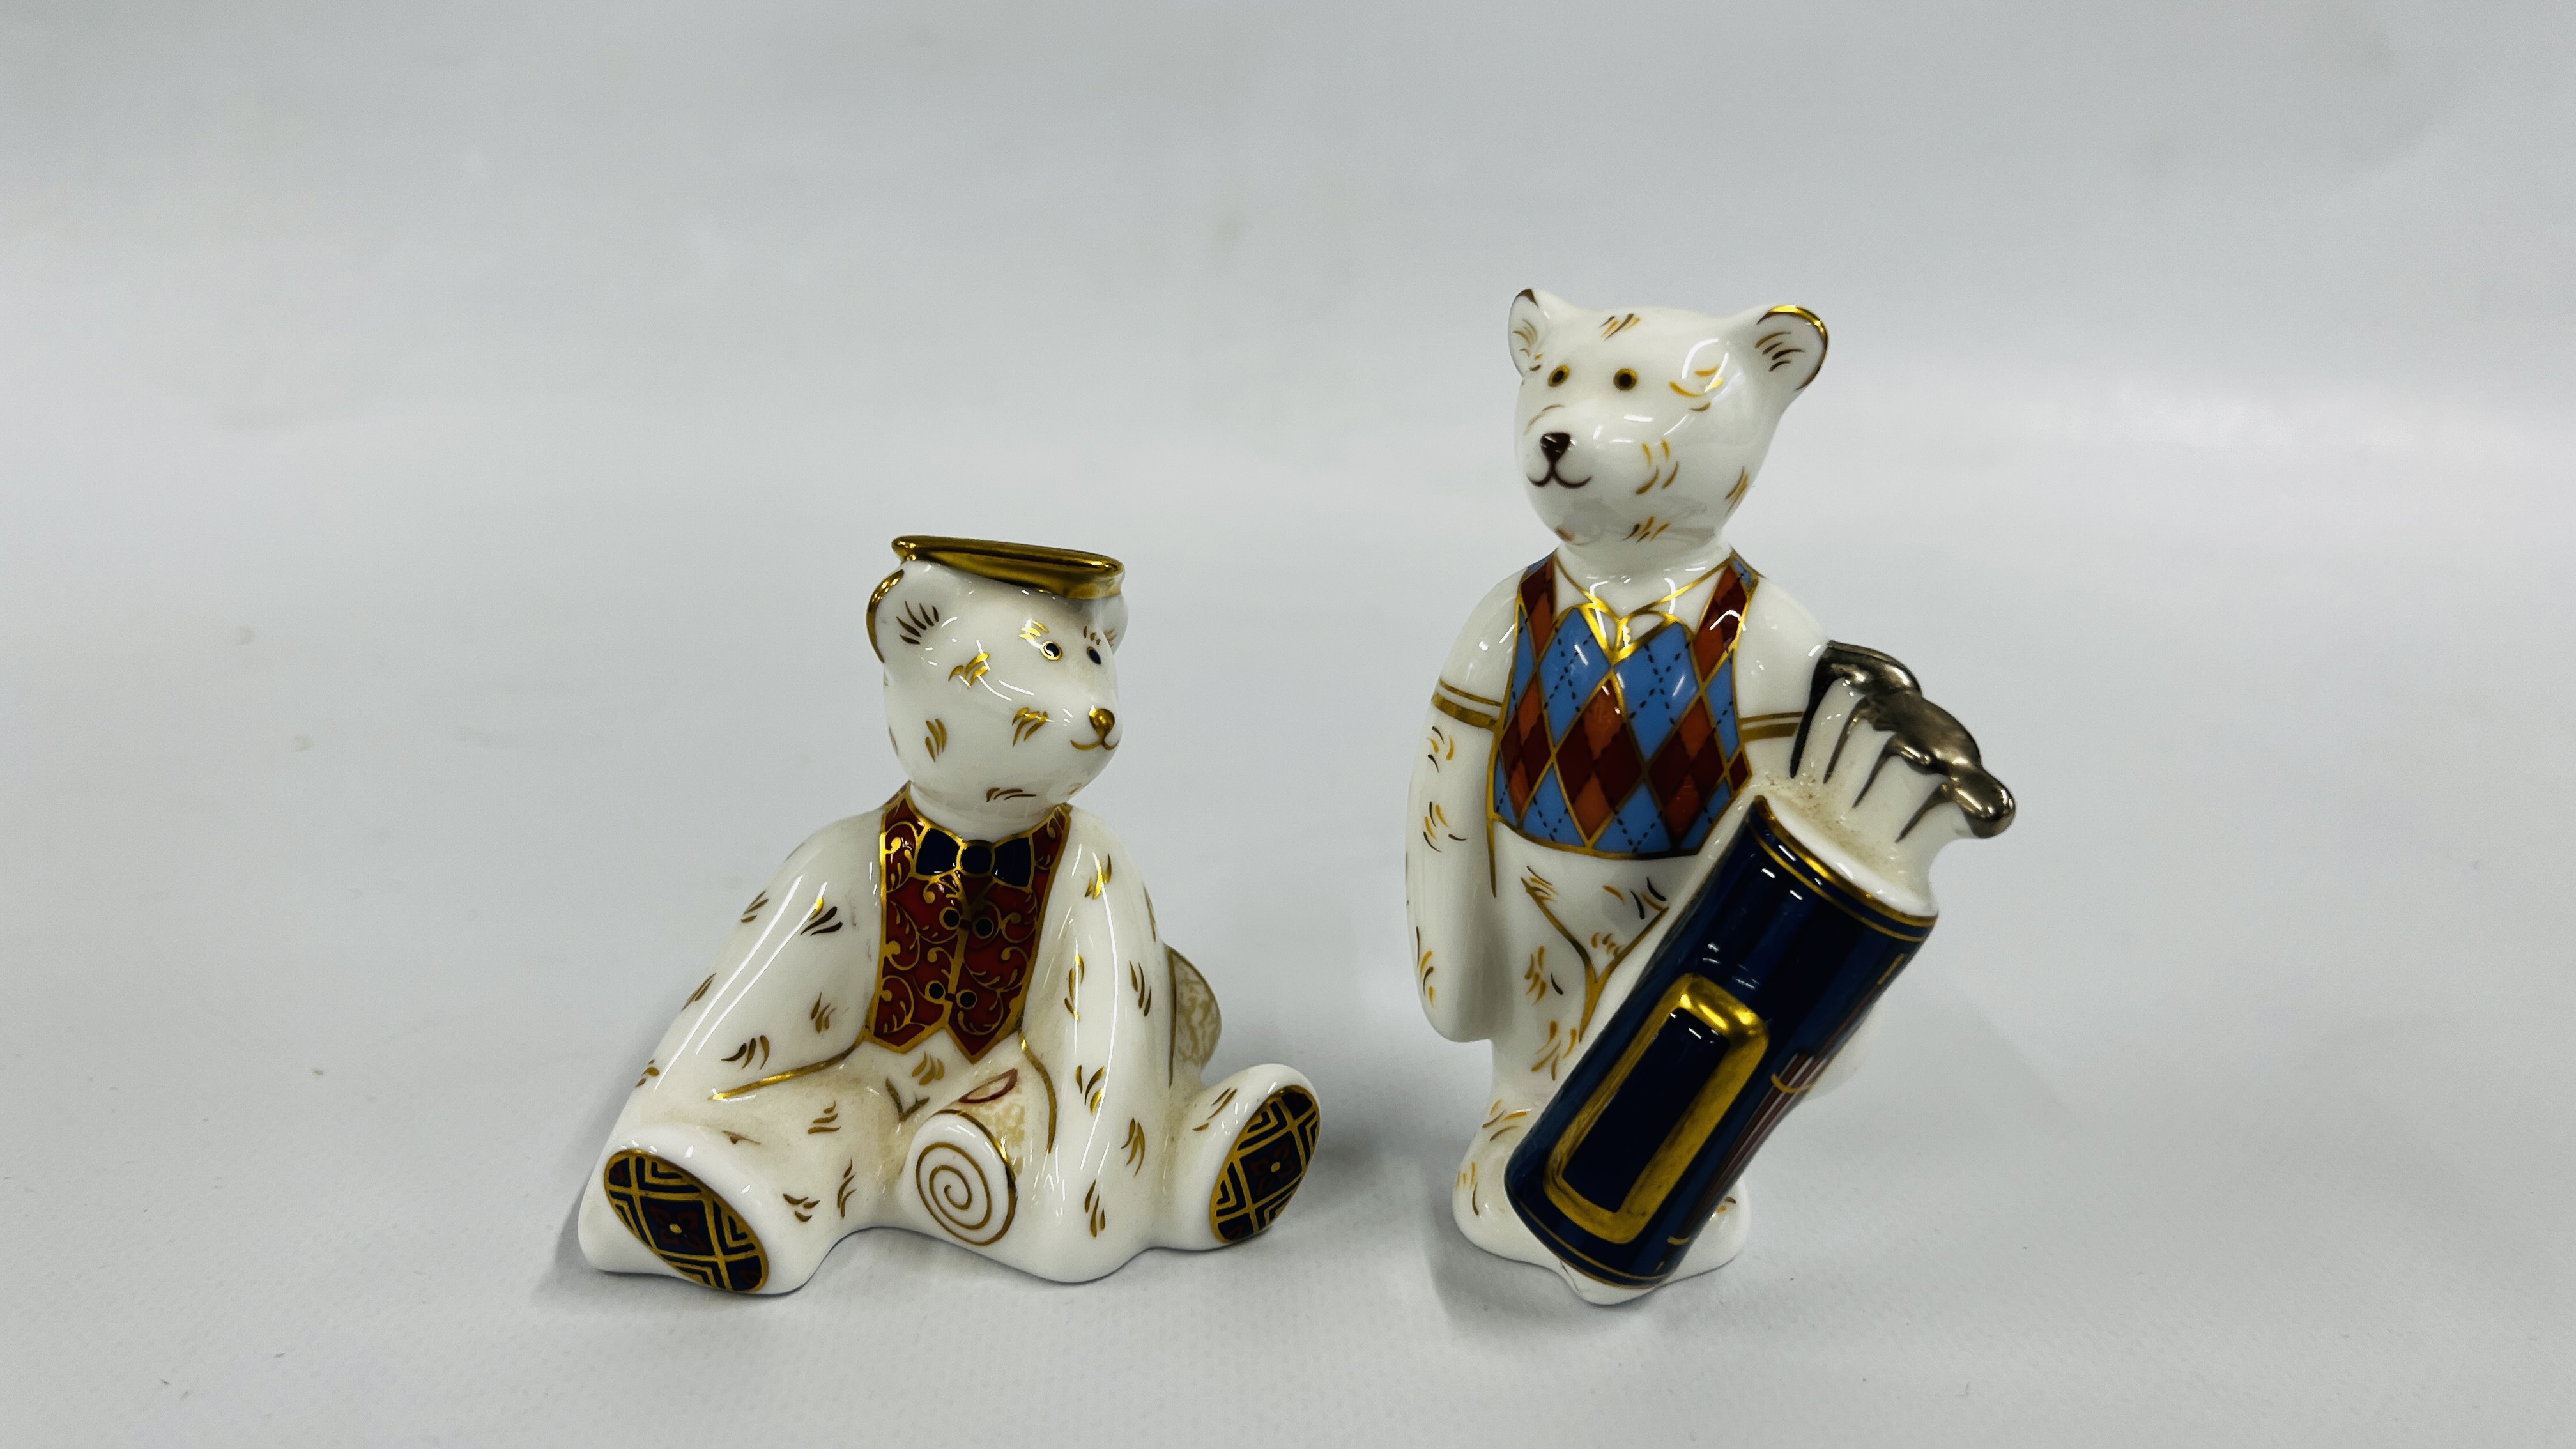 2 ROYAL CROWN DERBY FIGURES TO INCLUDE "GRADUATE" H 7CM AND GOLFER BEAR H 9CM NO STOPPERS.